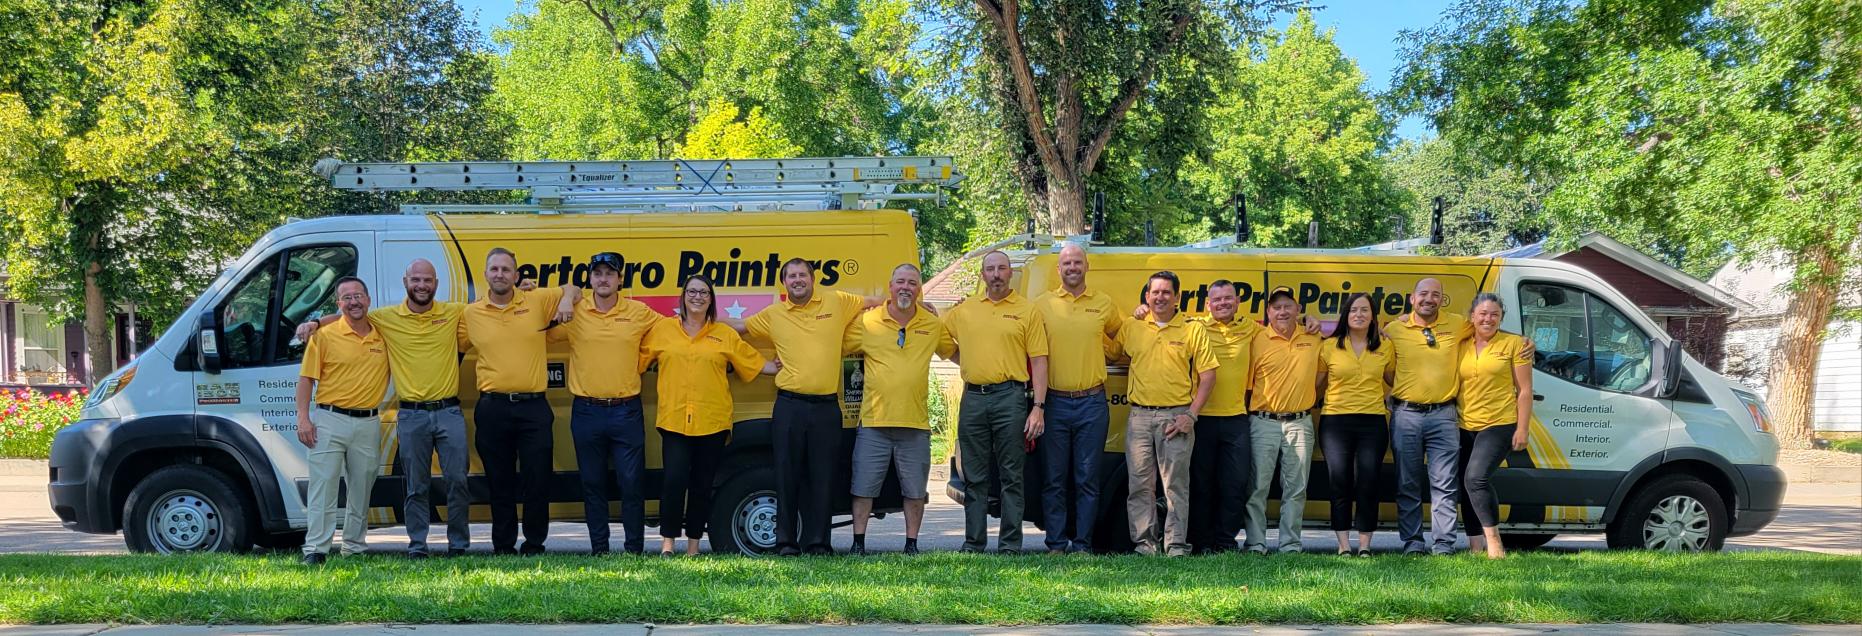 CertaPro Painters of Fort Collins Team